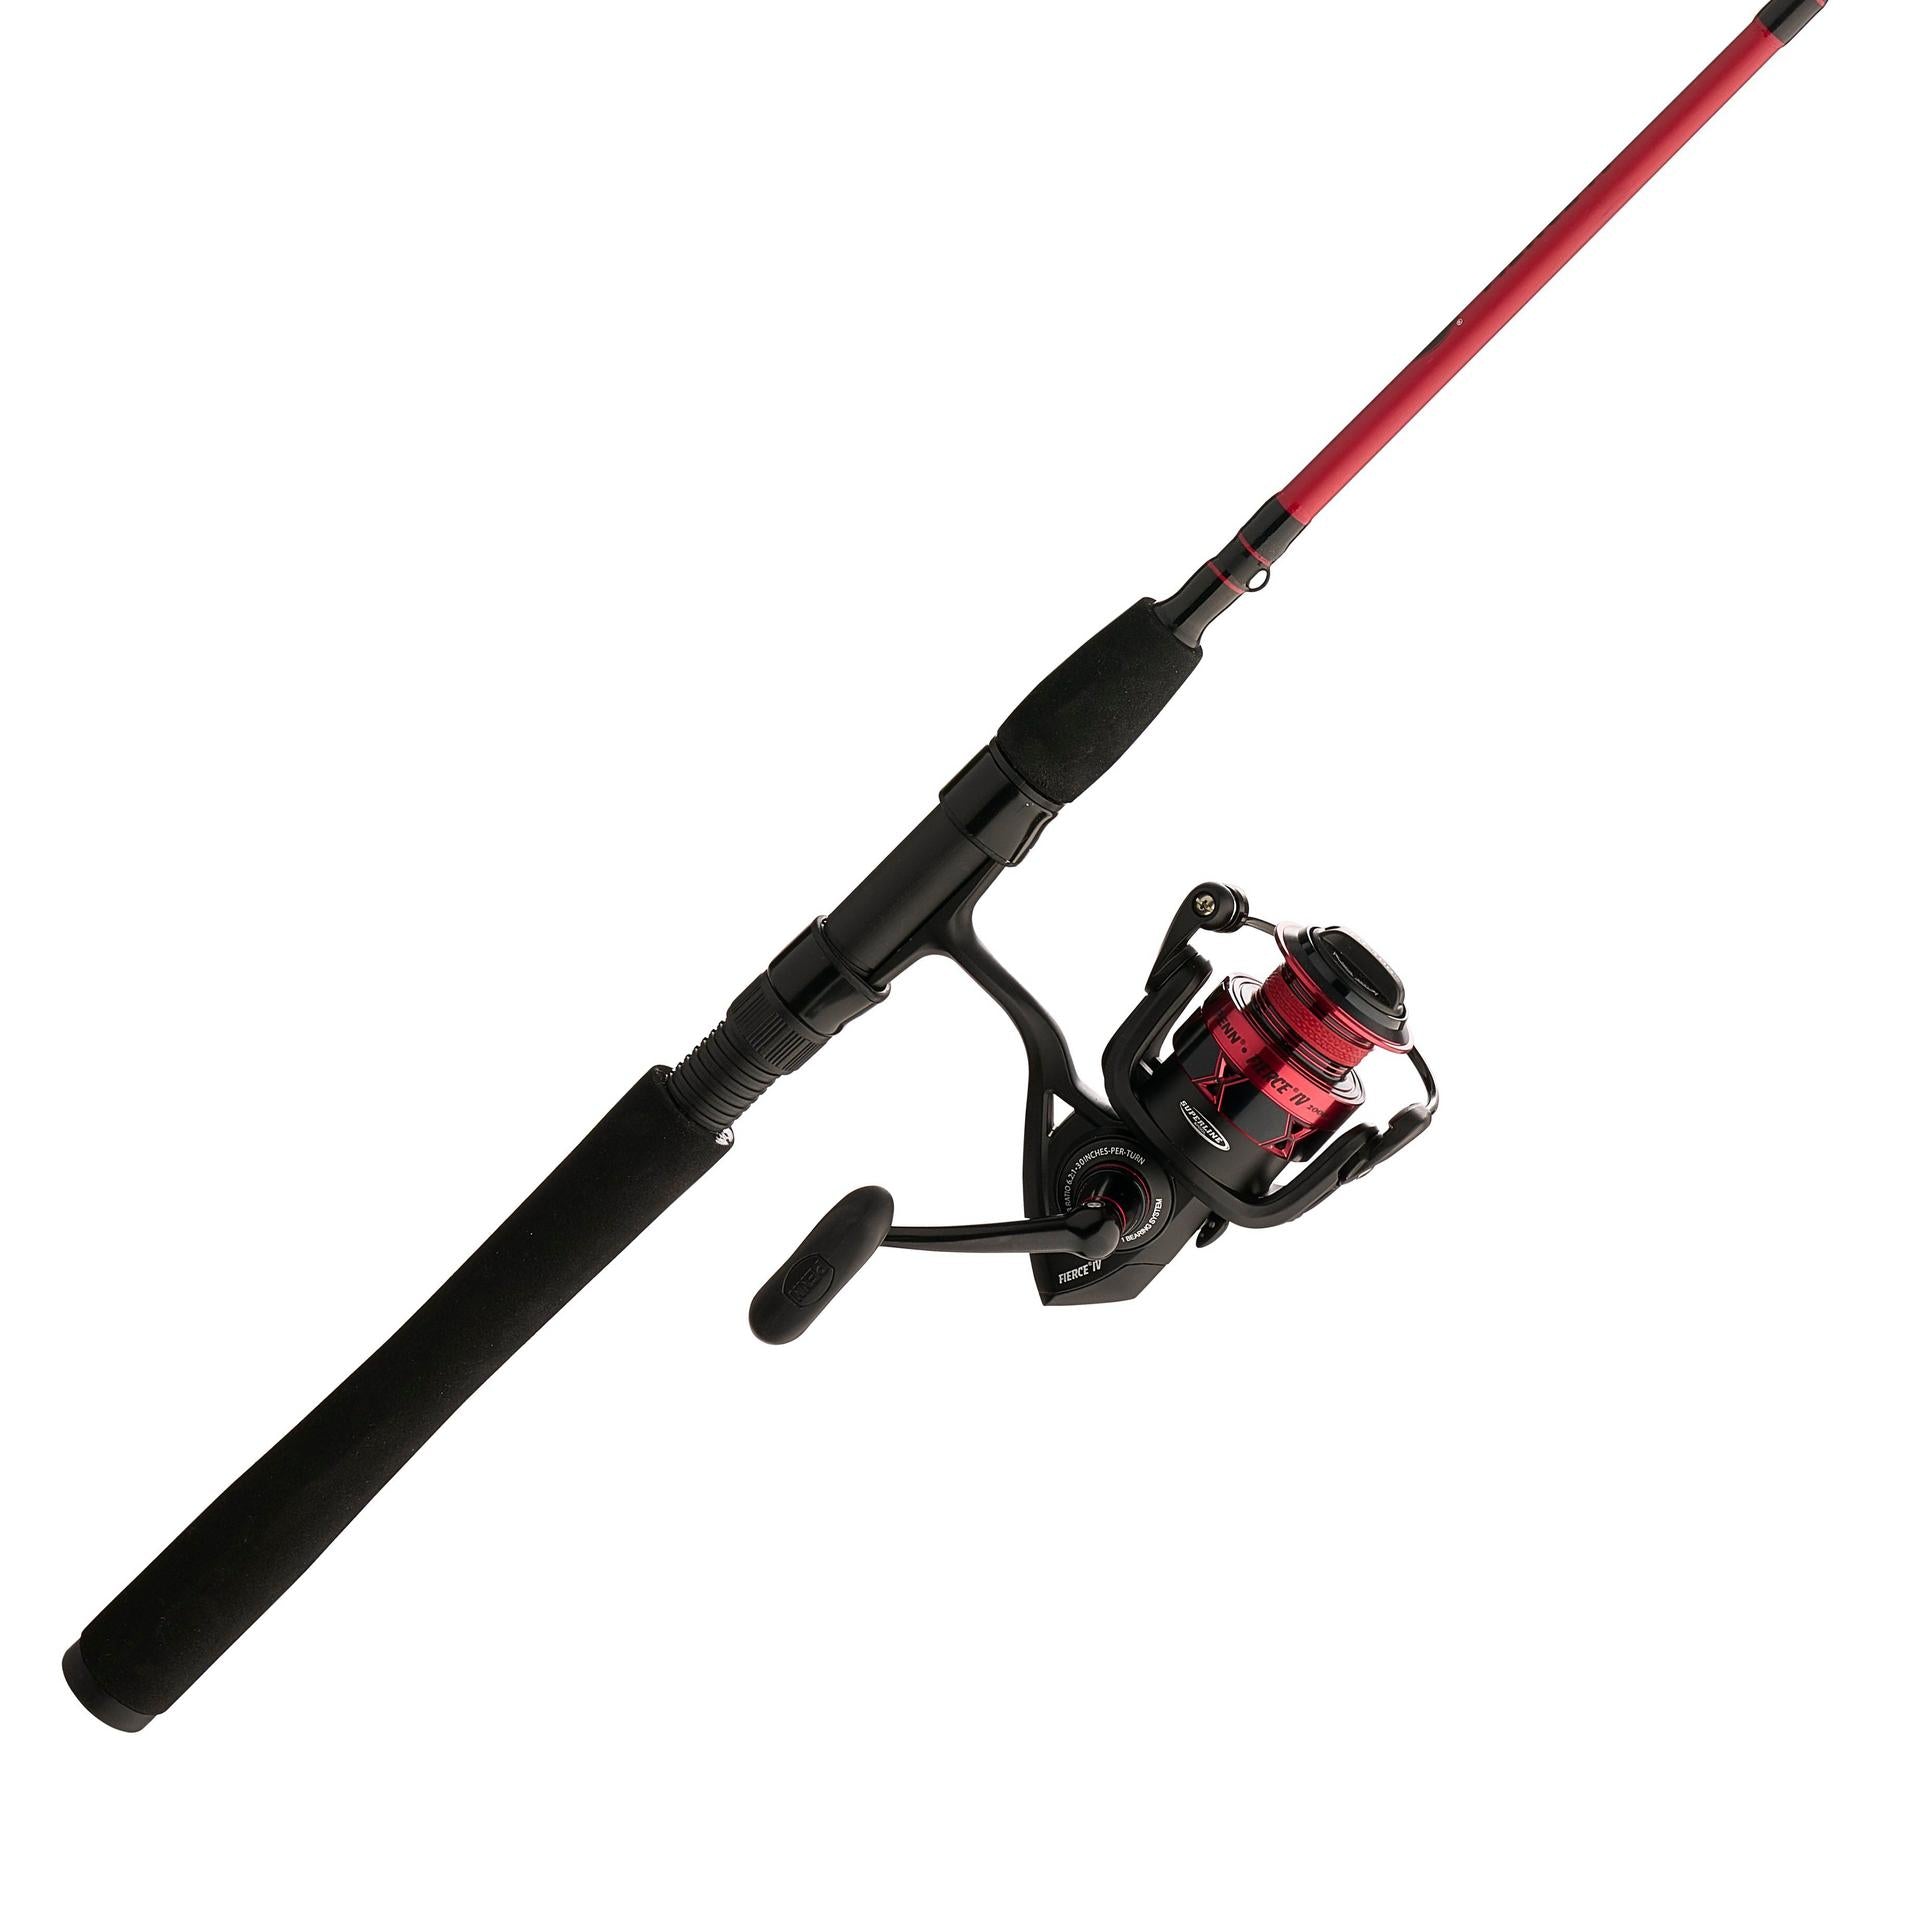 PENN Spinfisher VI Fishing Rod and Reel Spinning Combo, 7' 1PC H